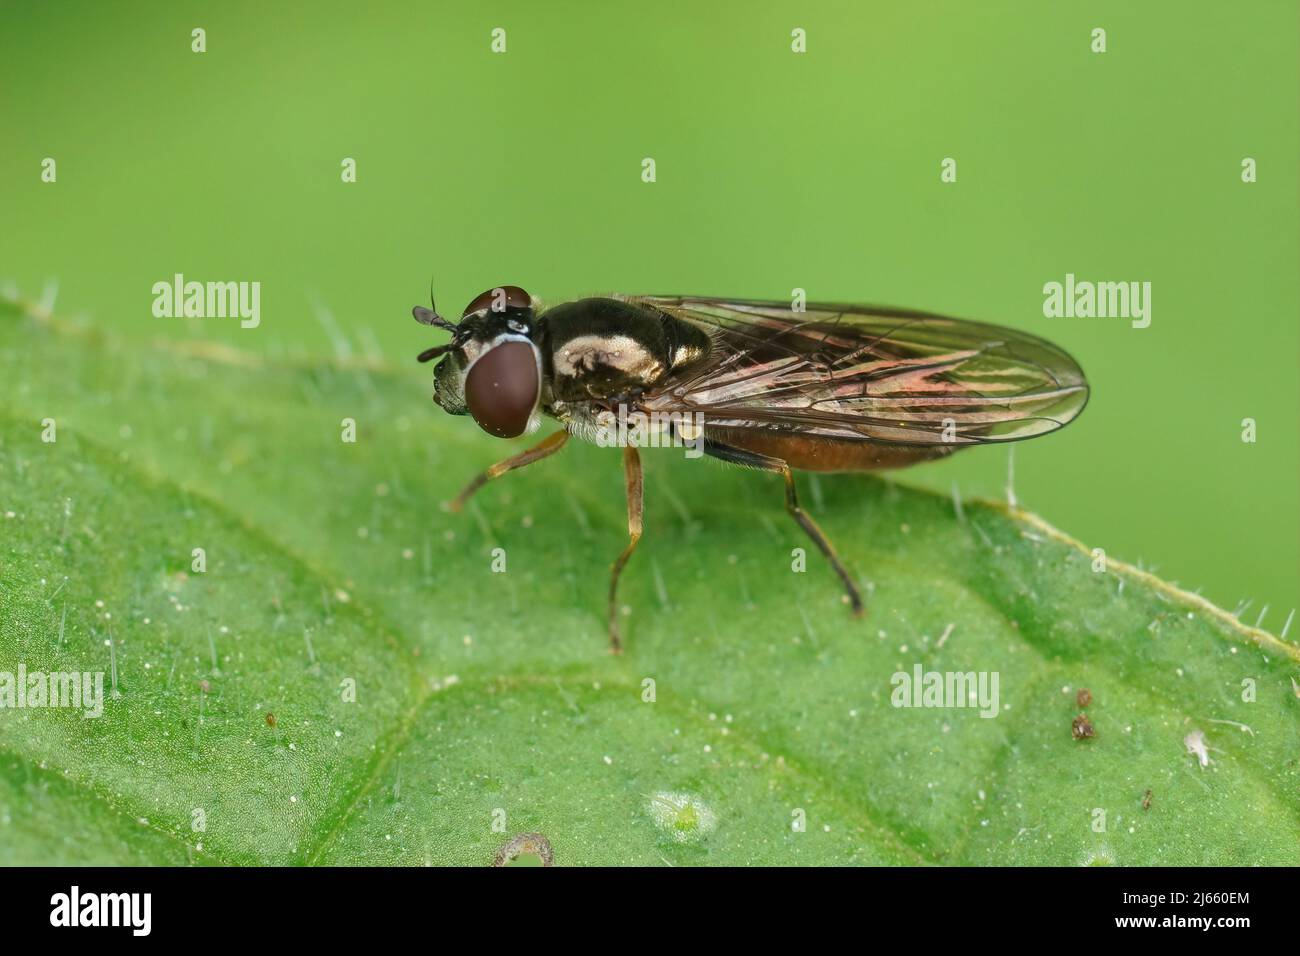 Closeup on a shiny Small Hoverfly, Platycheirus albimanus sitting on a green leaf in the garden Stock Photo